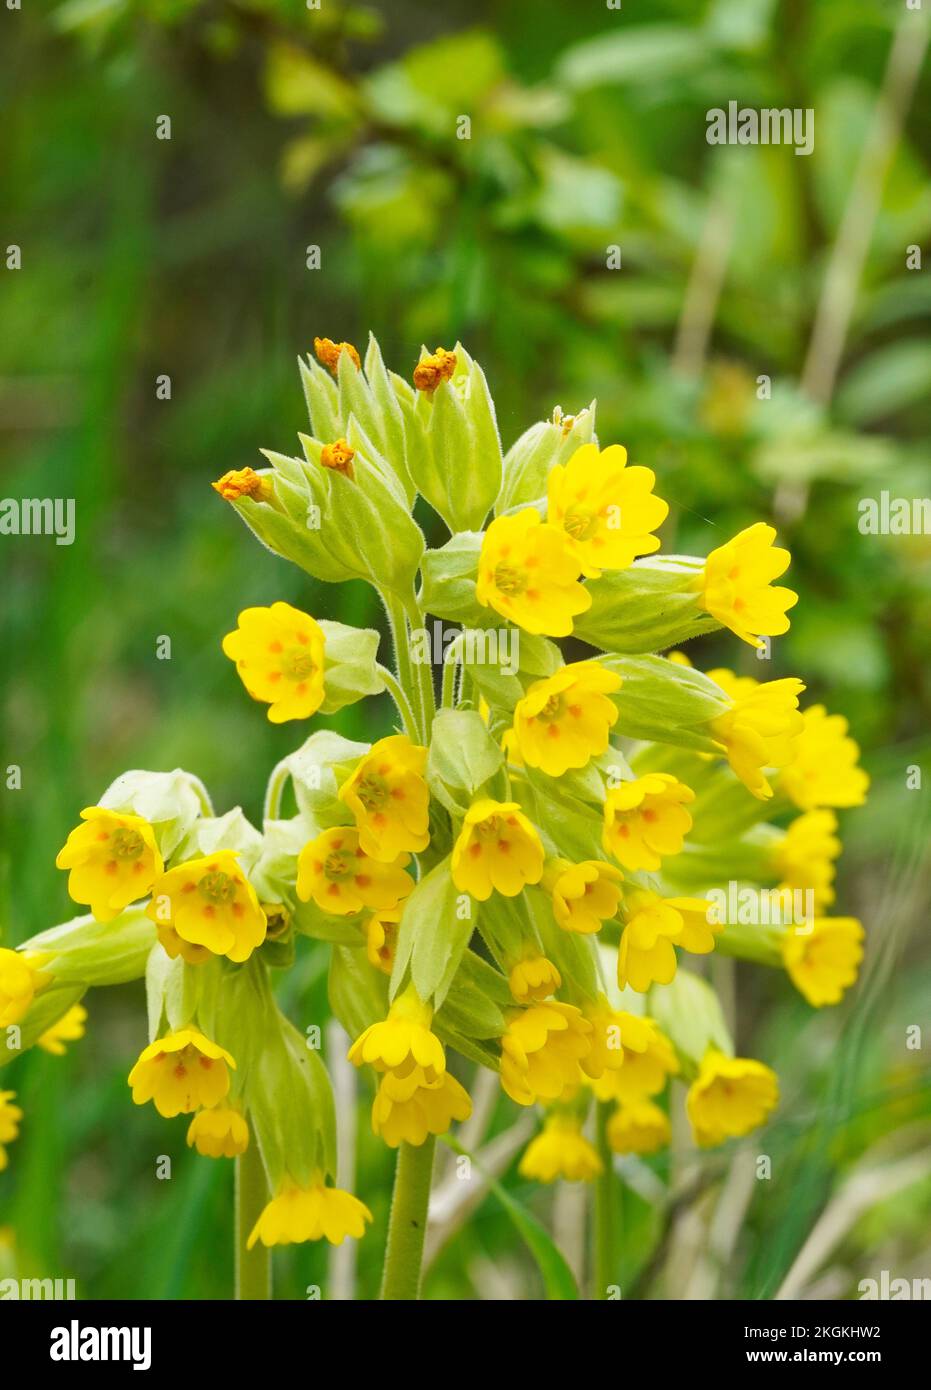 Blooming cowslip in the garden. Yellow flowers close-up. Primula veris. Stock Photo